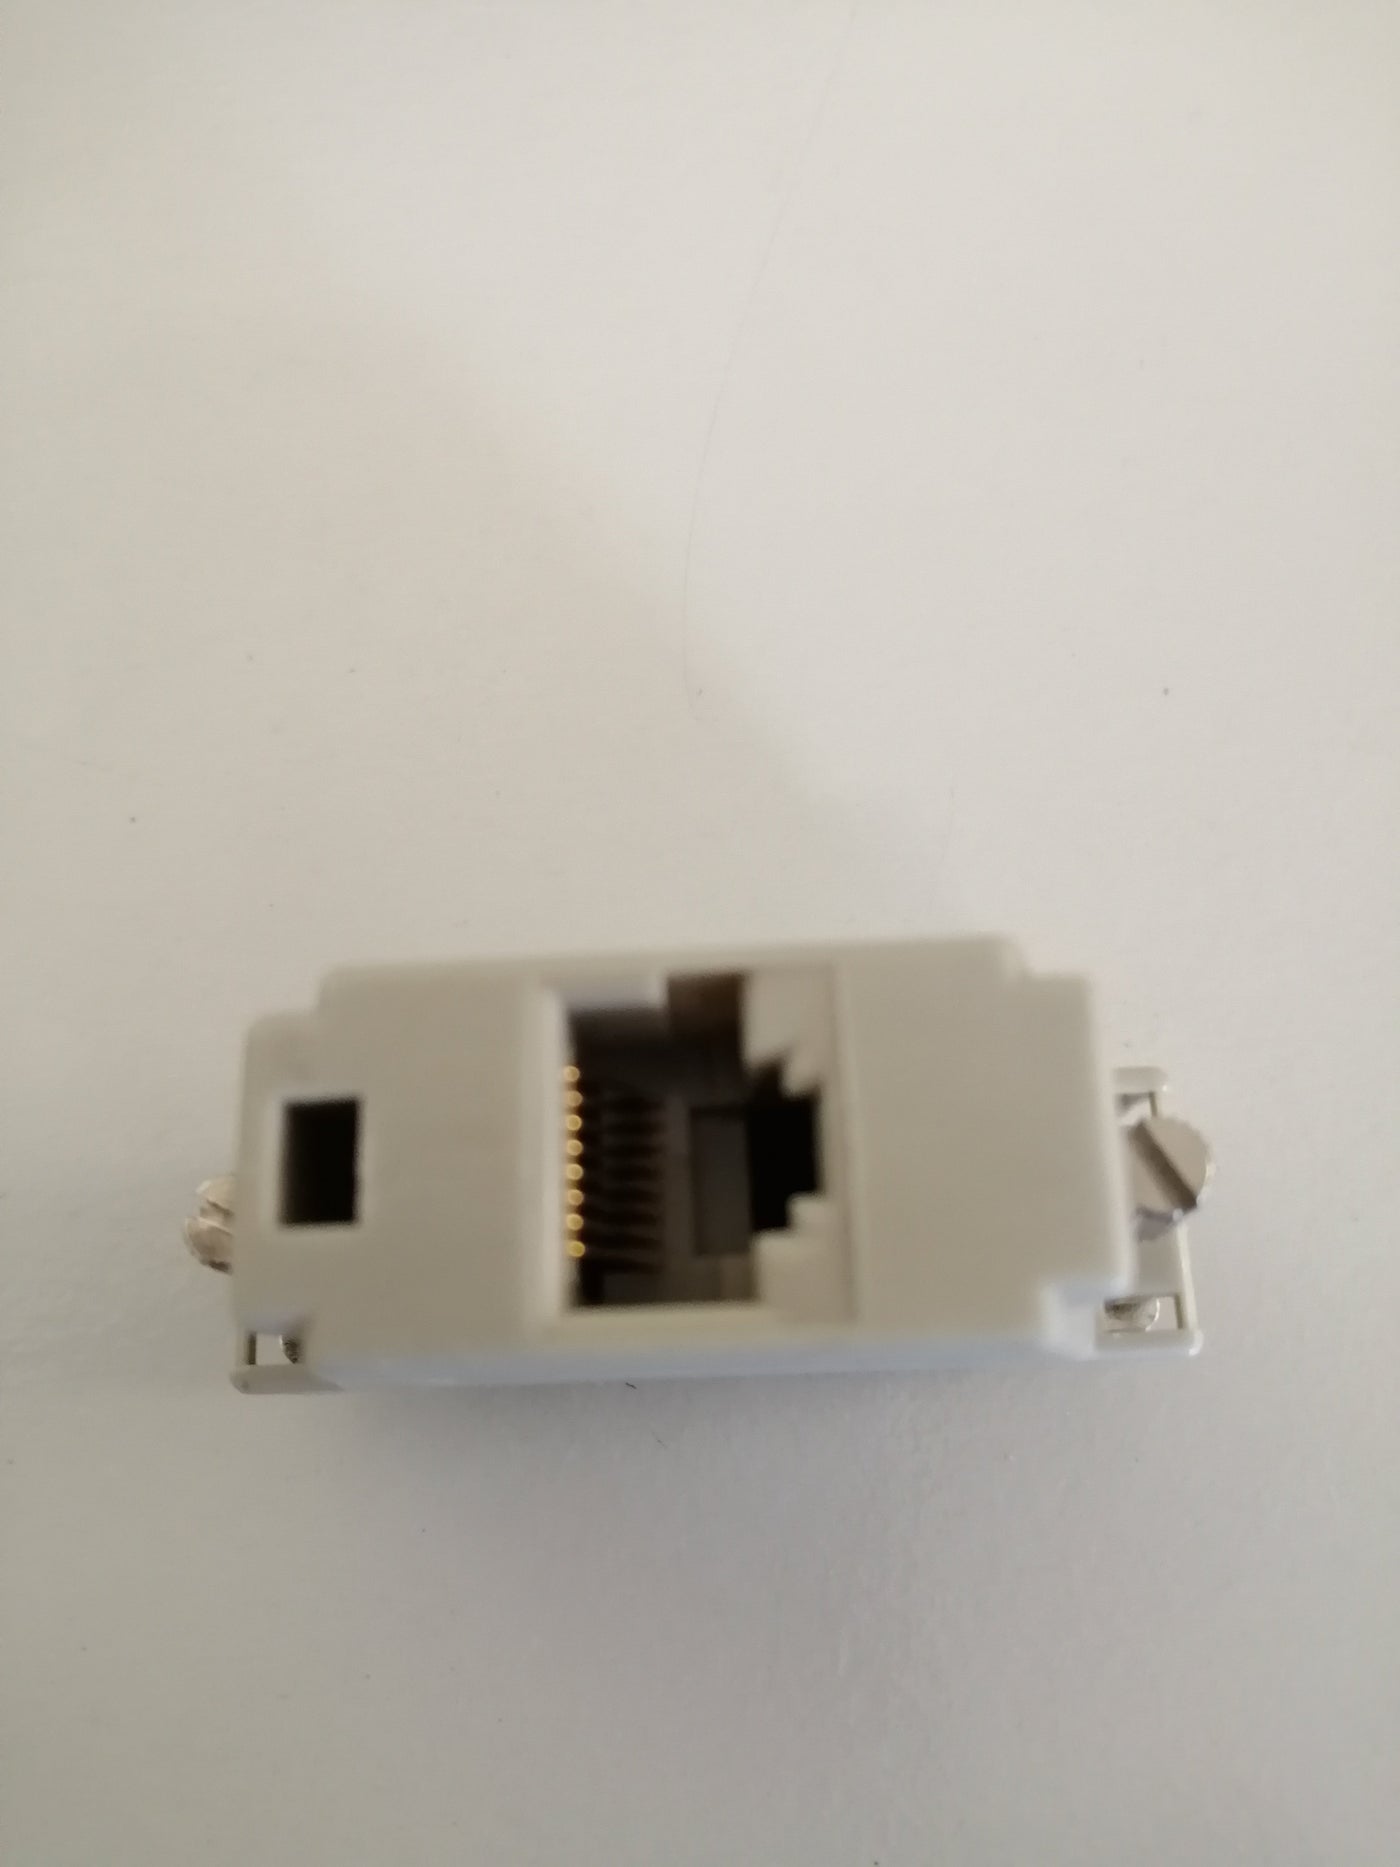 oem RJ45 To 25-Pin Connector ( 0070-03155-01 ) USED